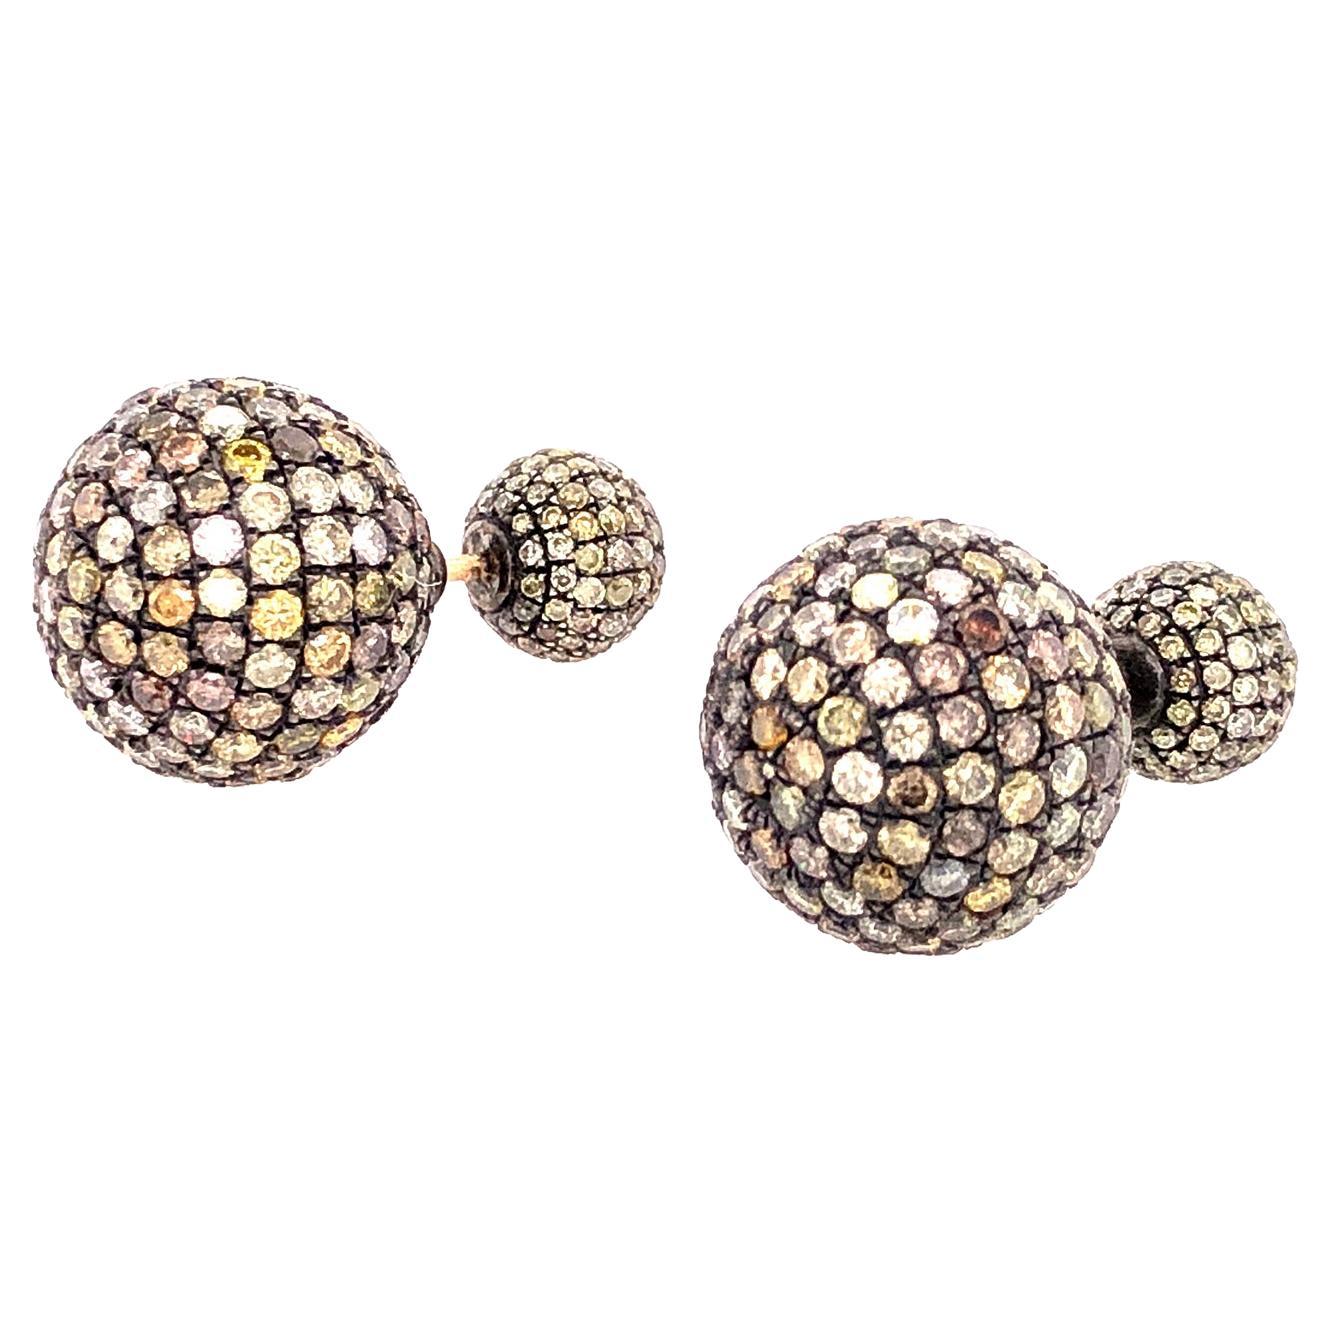 Pave Diamond Ball Tunnel Earrings Made in 14k Gold & Silver